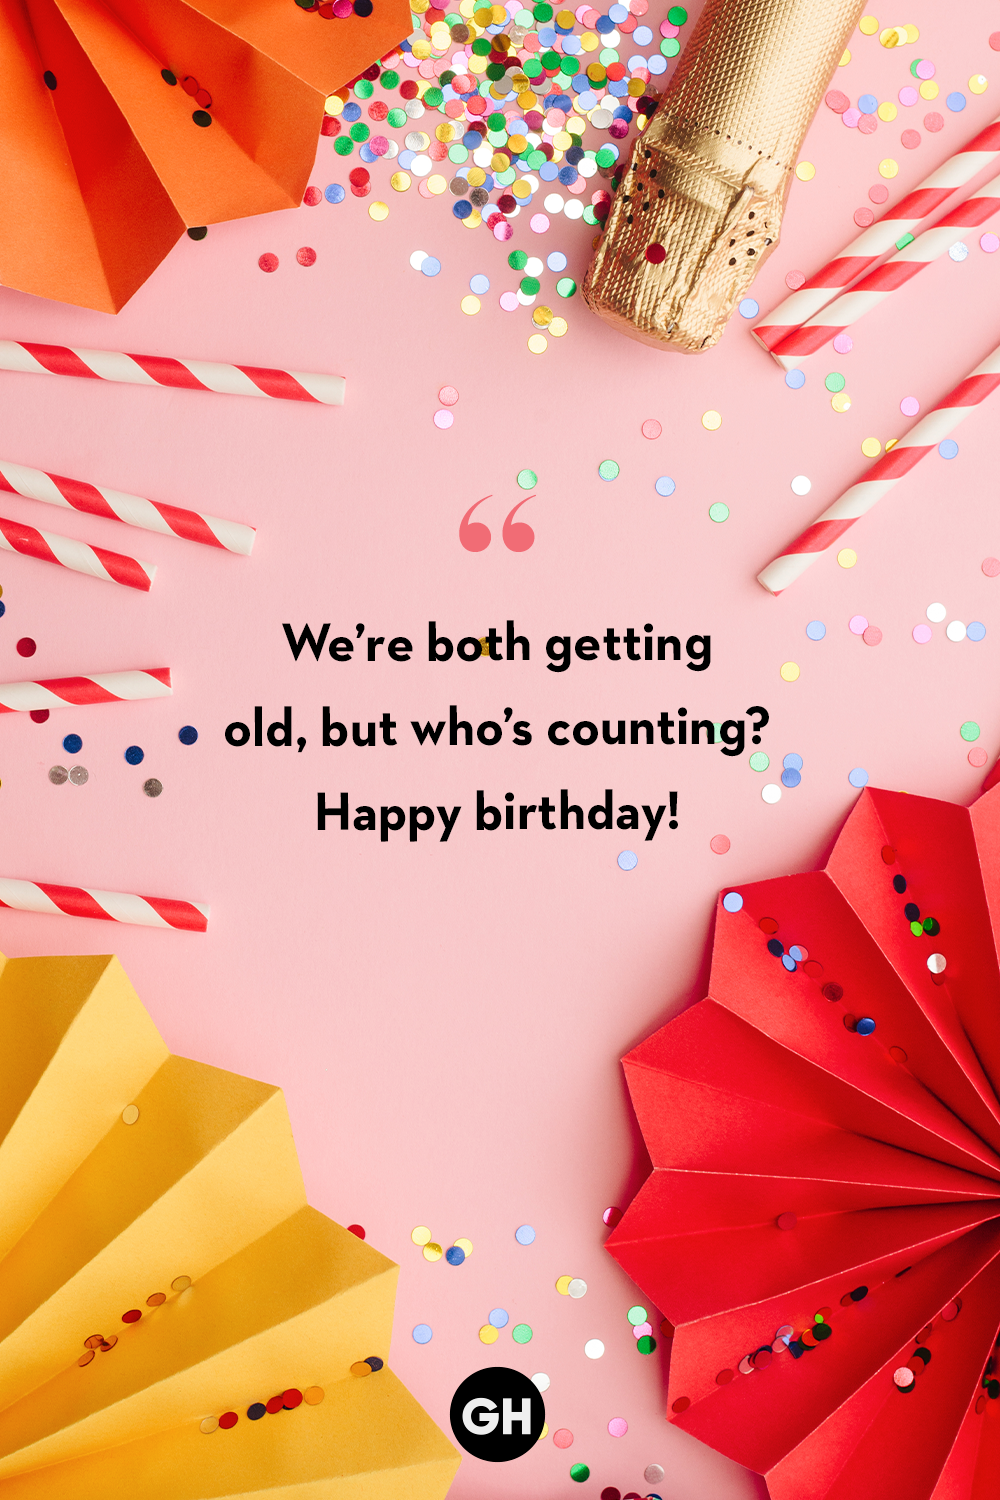 “An Incredible Collection of Full 4K Happy Birthday Friend Images – 999+ Top Picks!”